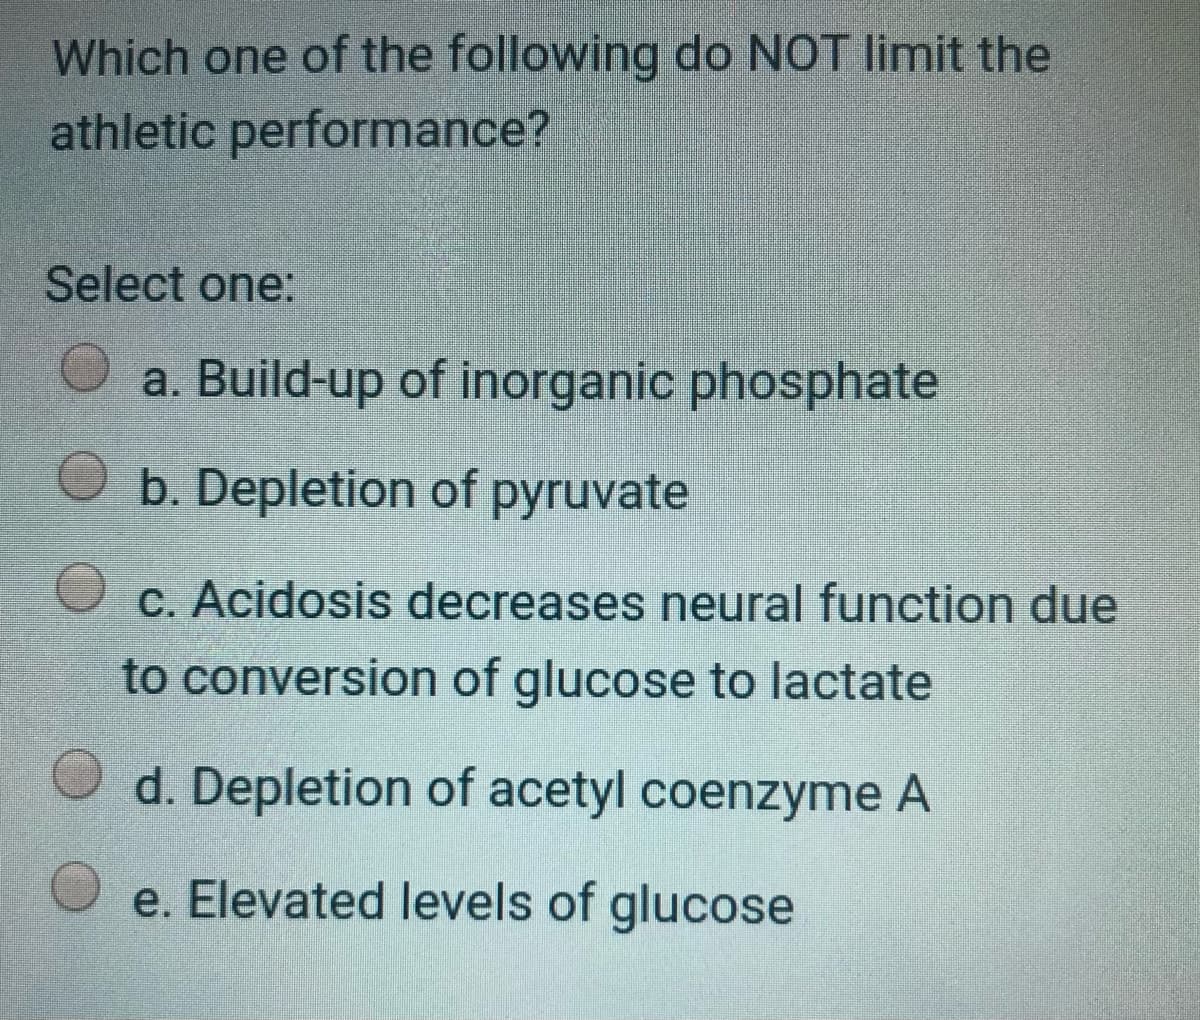 Which one of the following do NOT limit the
athletic performance?
Select one:
a. Build-up of inorganic phosphate
b. Depletion of pyruvate
O c. Acidosis decreases neural function due
to conversion of glucose to lactate
d. Depletion of acetyl coenzyme A
e. Elevated levels of glucose
